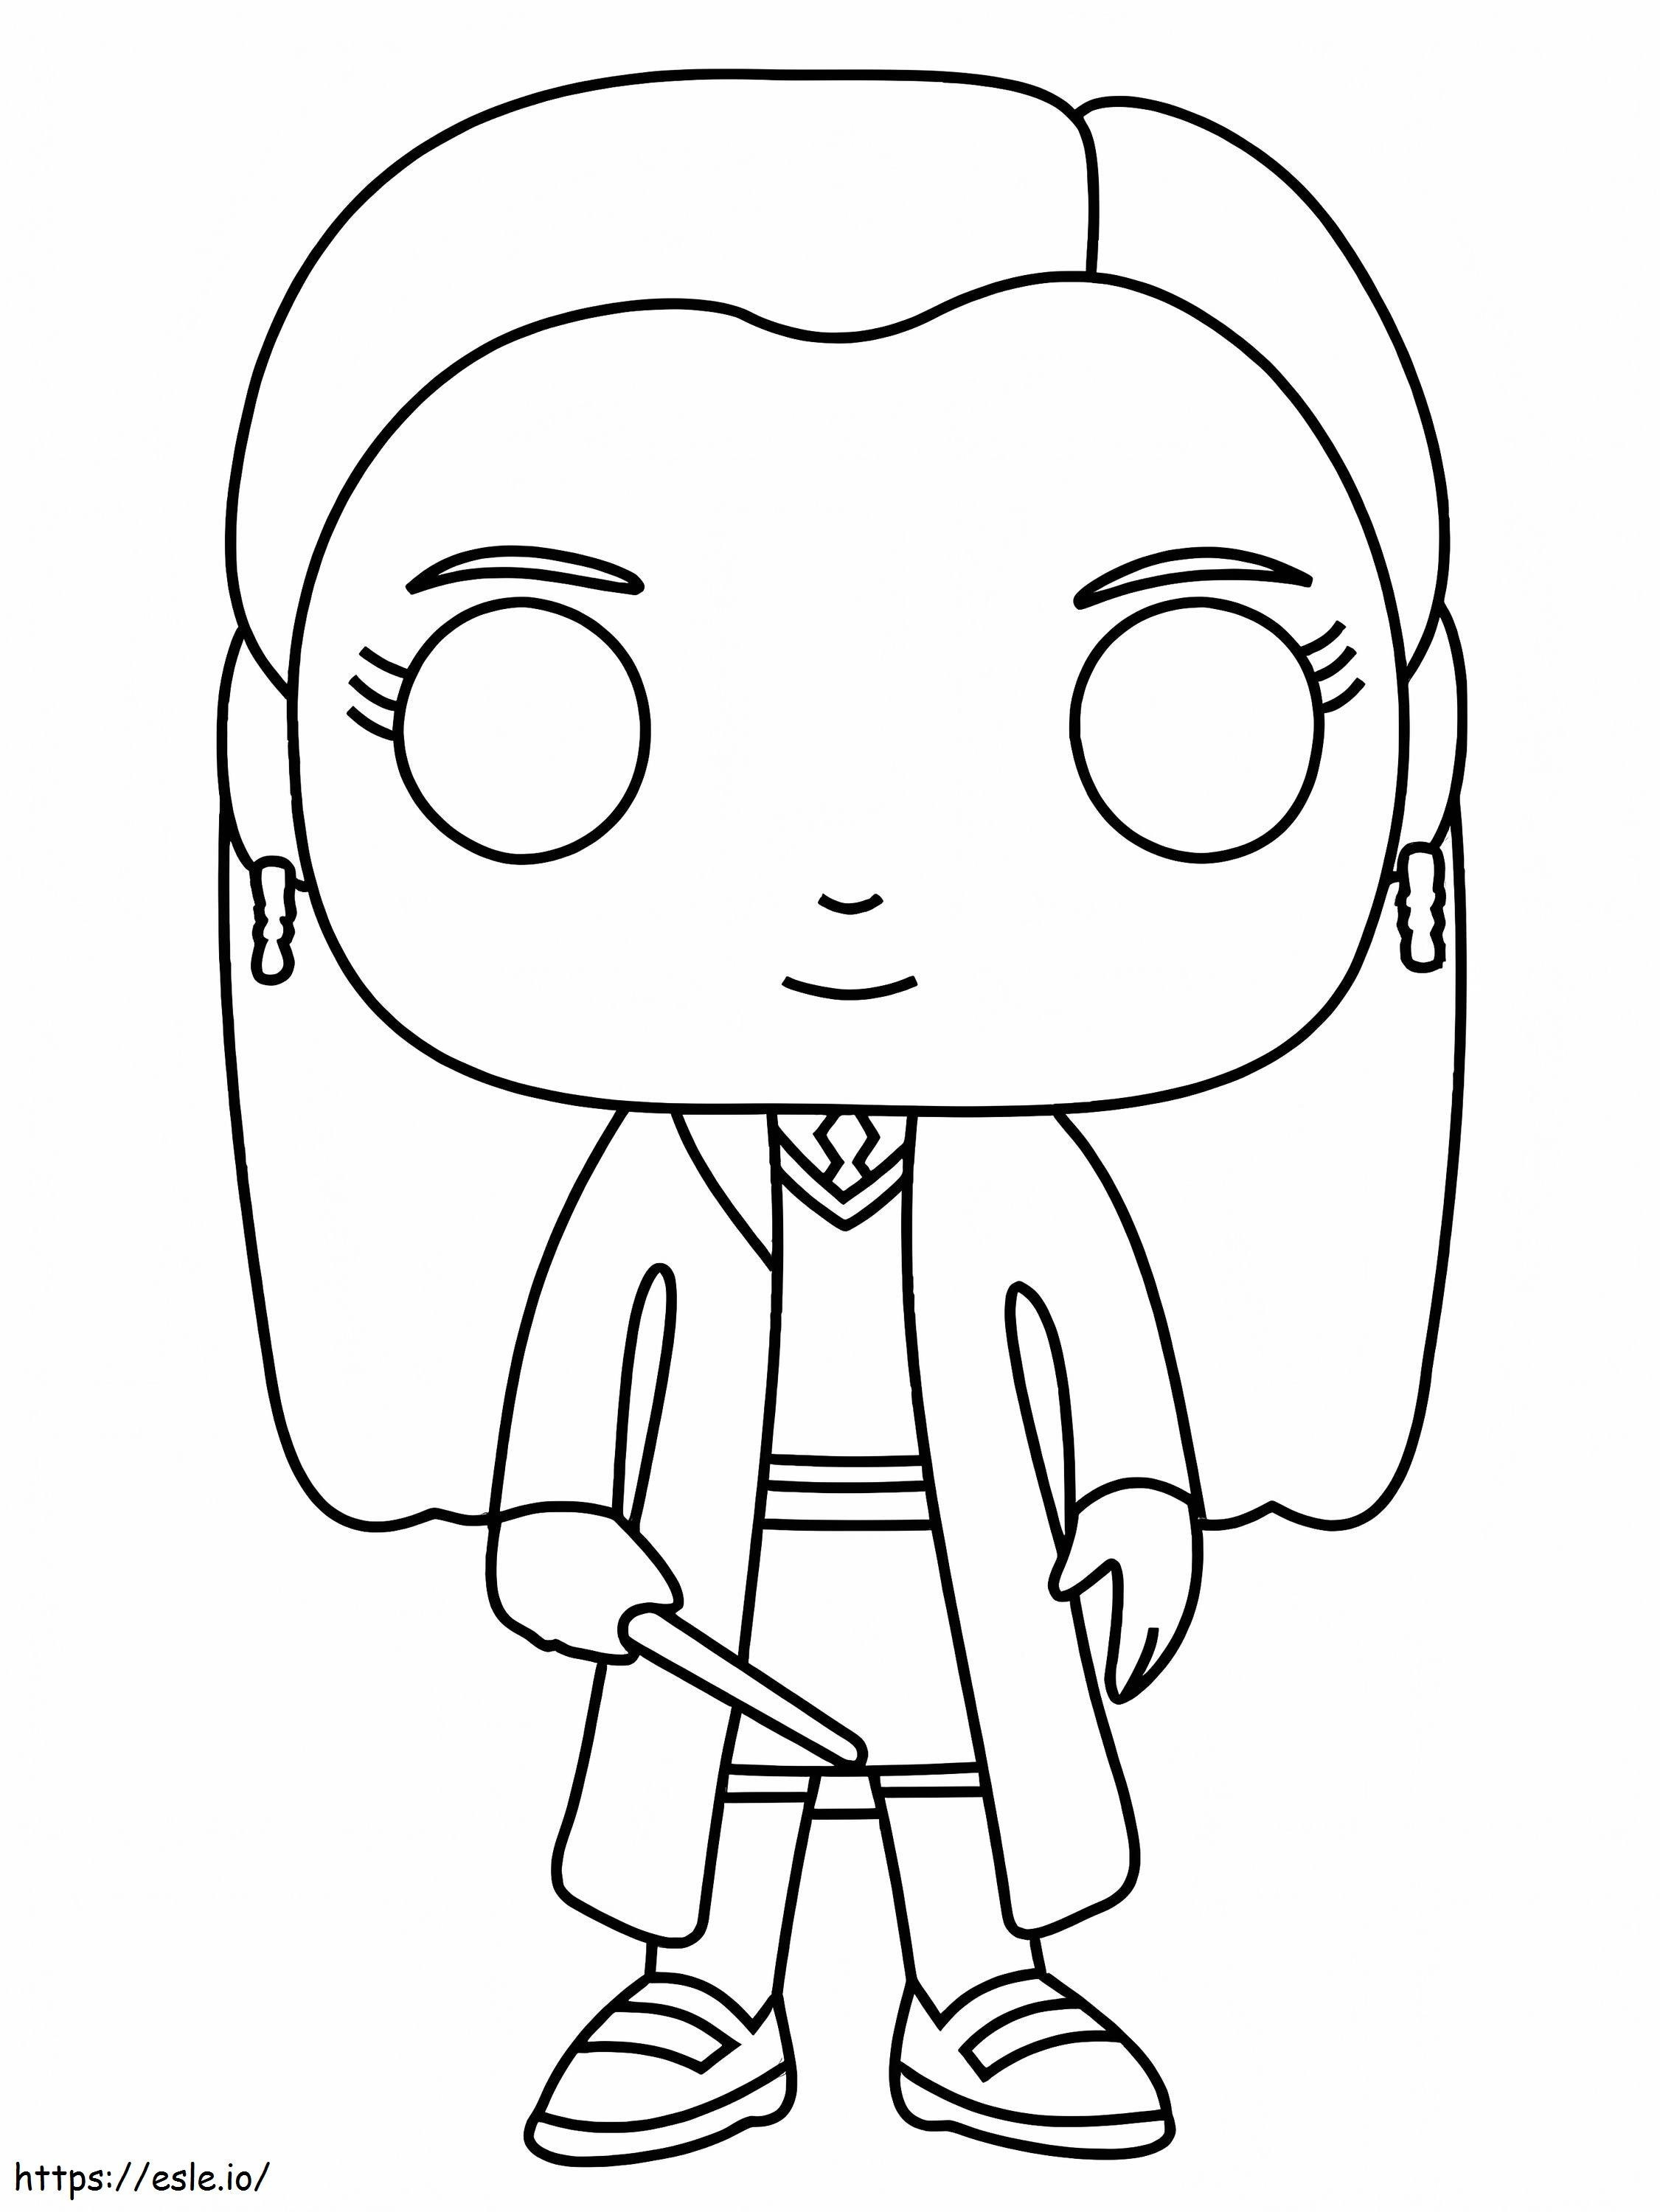 Hermione Funko coloring page